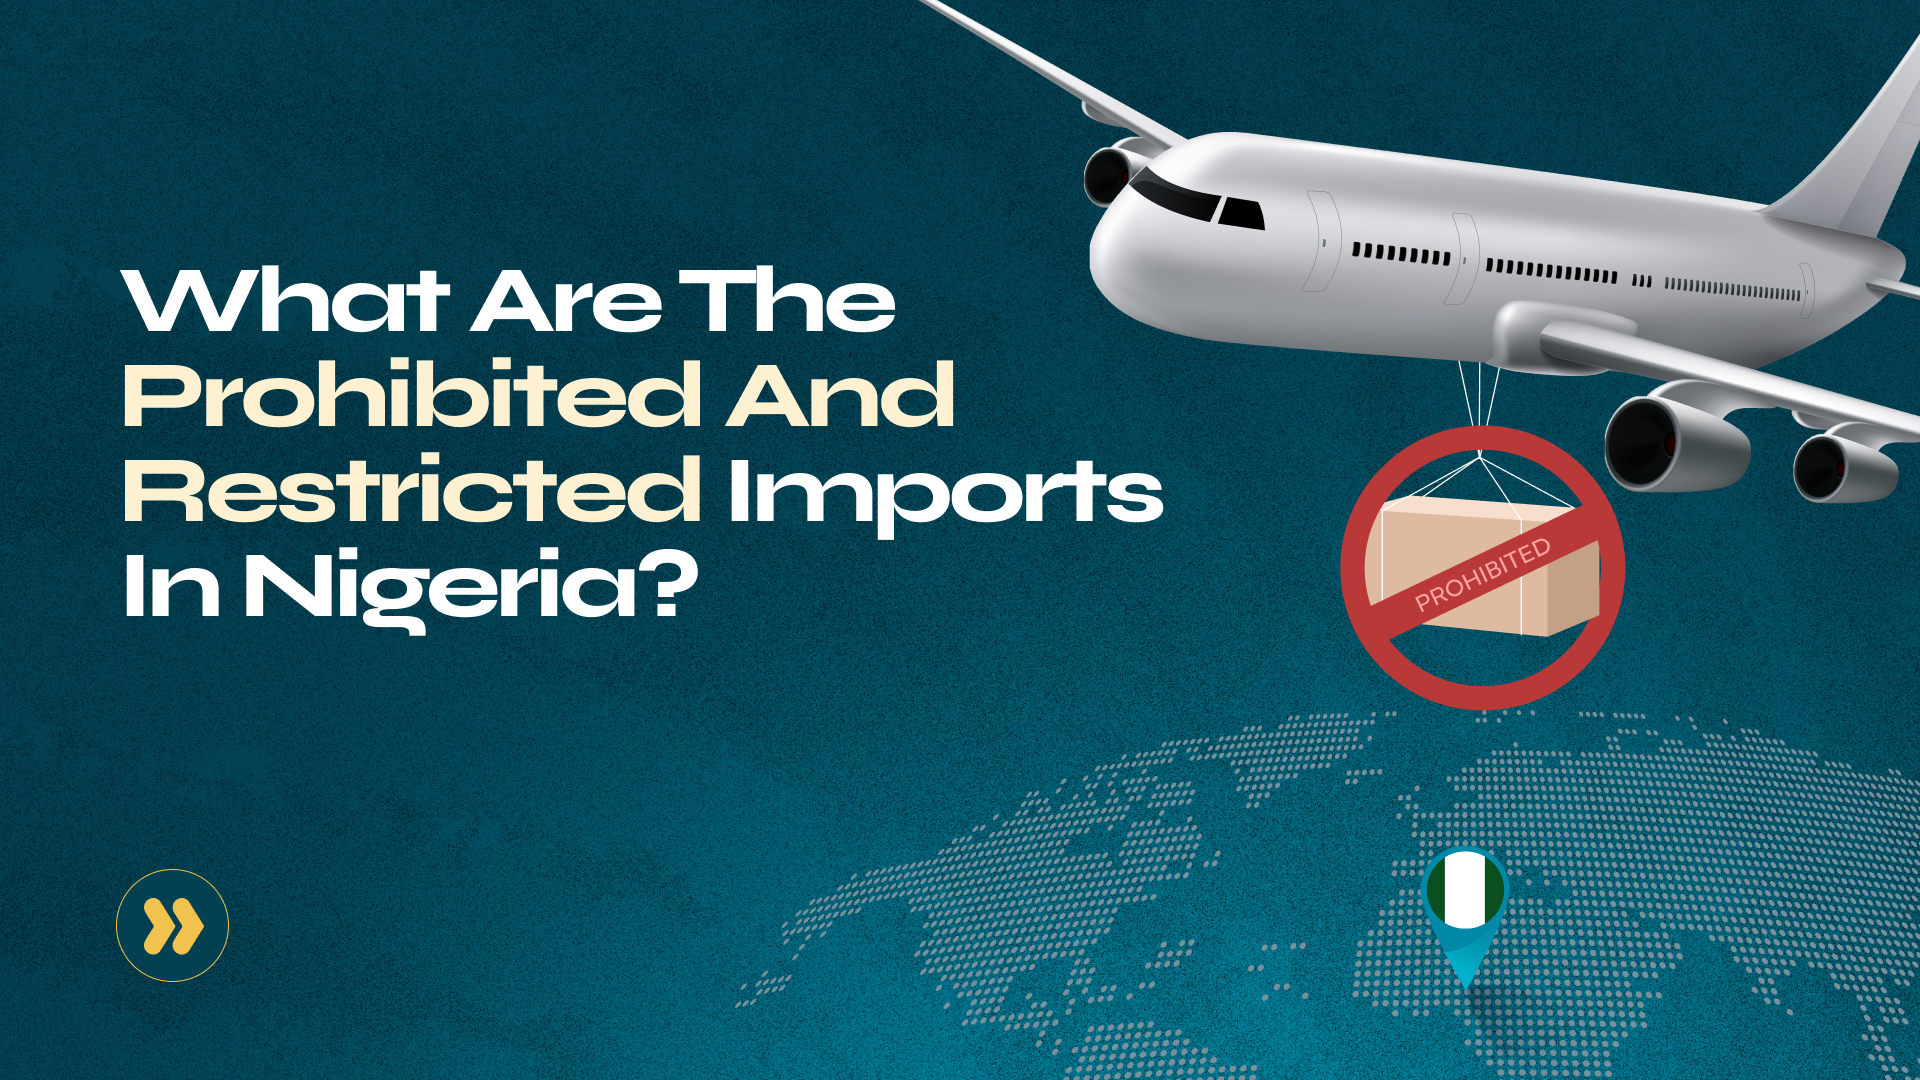 What are the Prohibited and Restricted Imports in Nigeria?